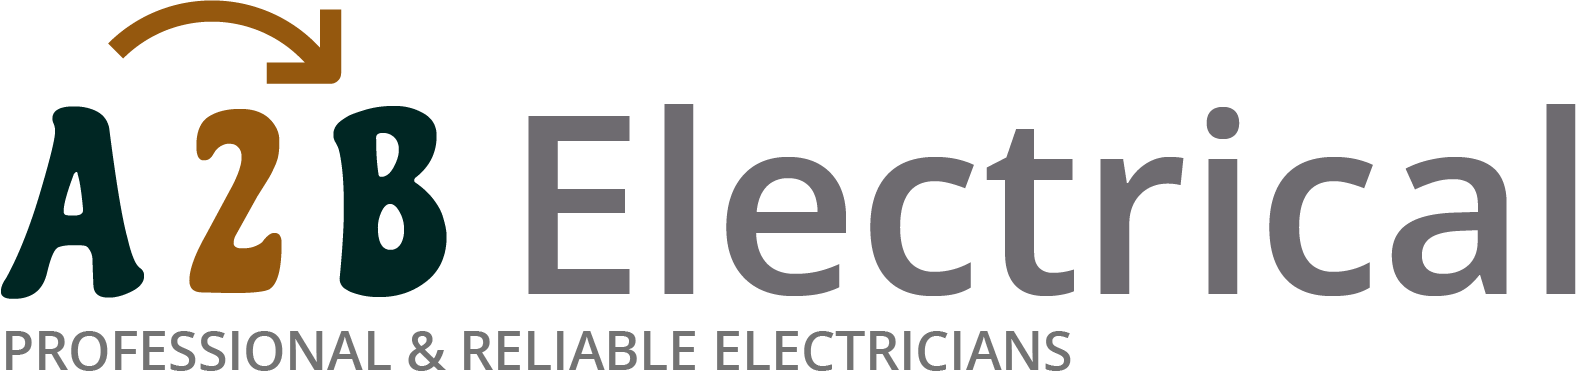 If you have electrical wiring problems in Lewisham, we can provide an electrician to have a look for you. 